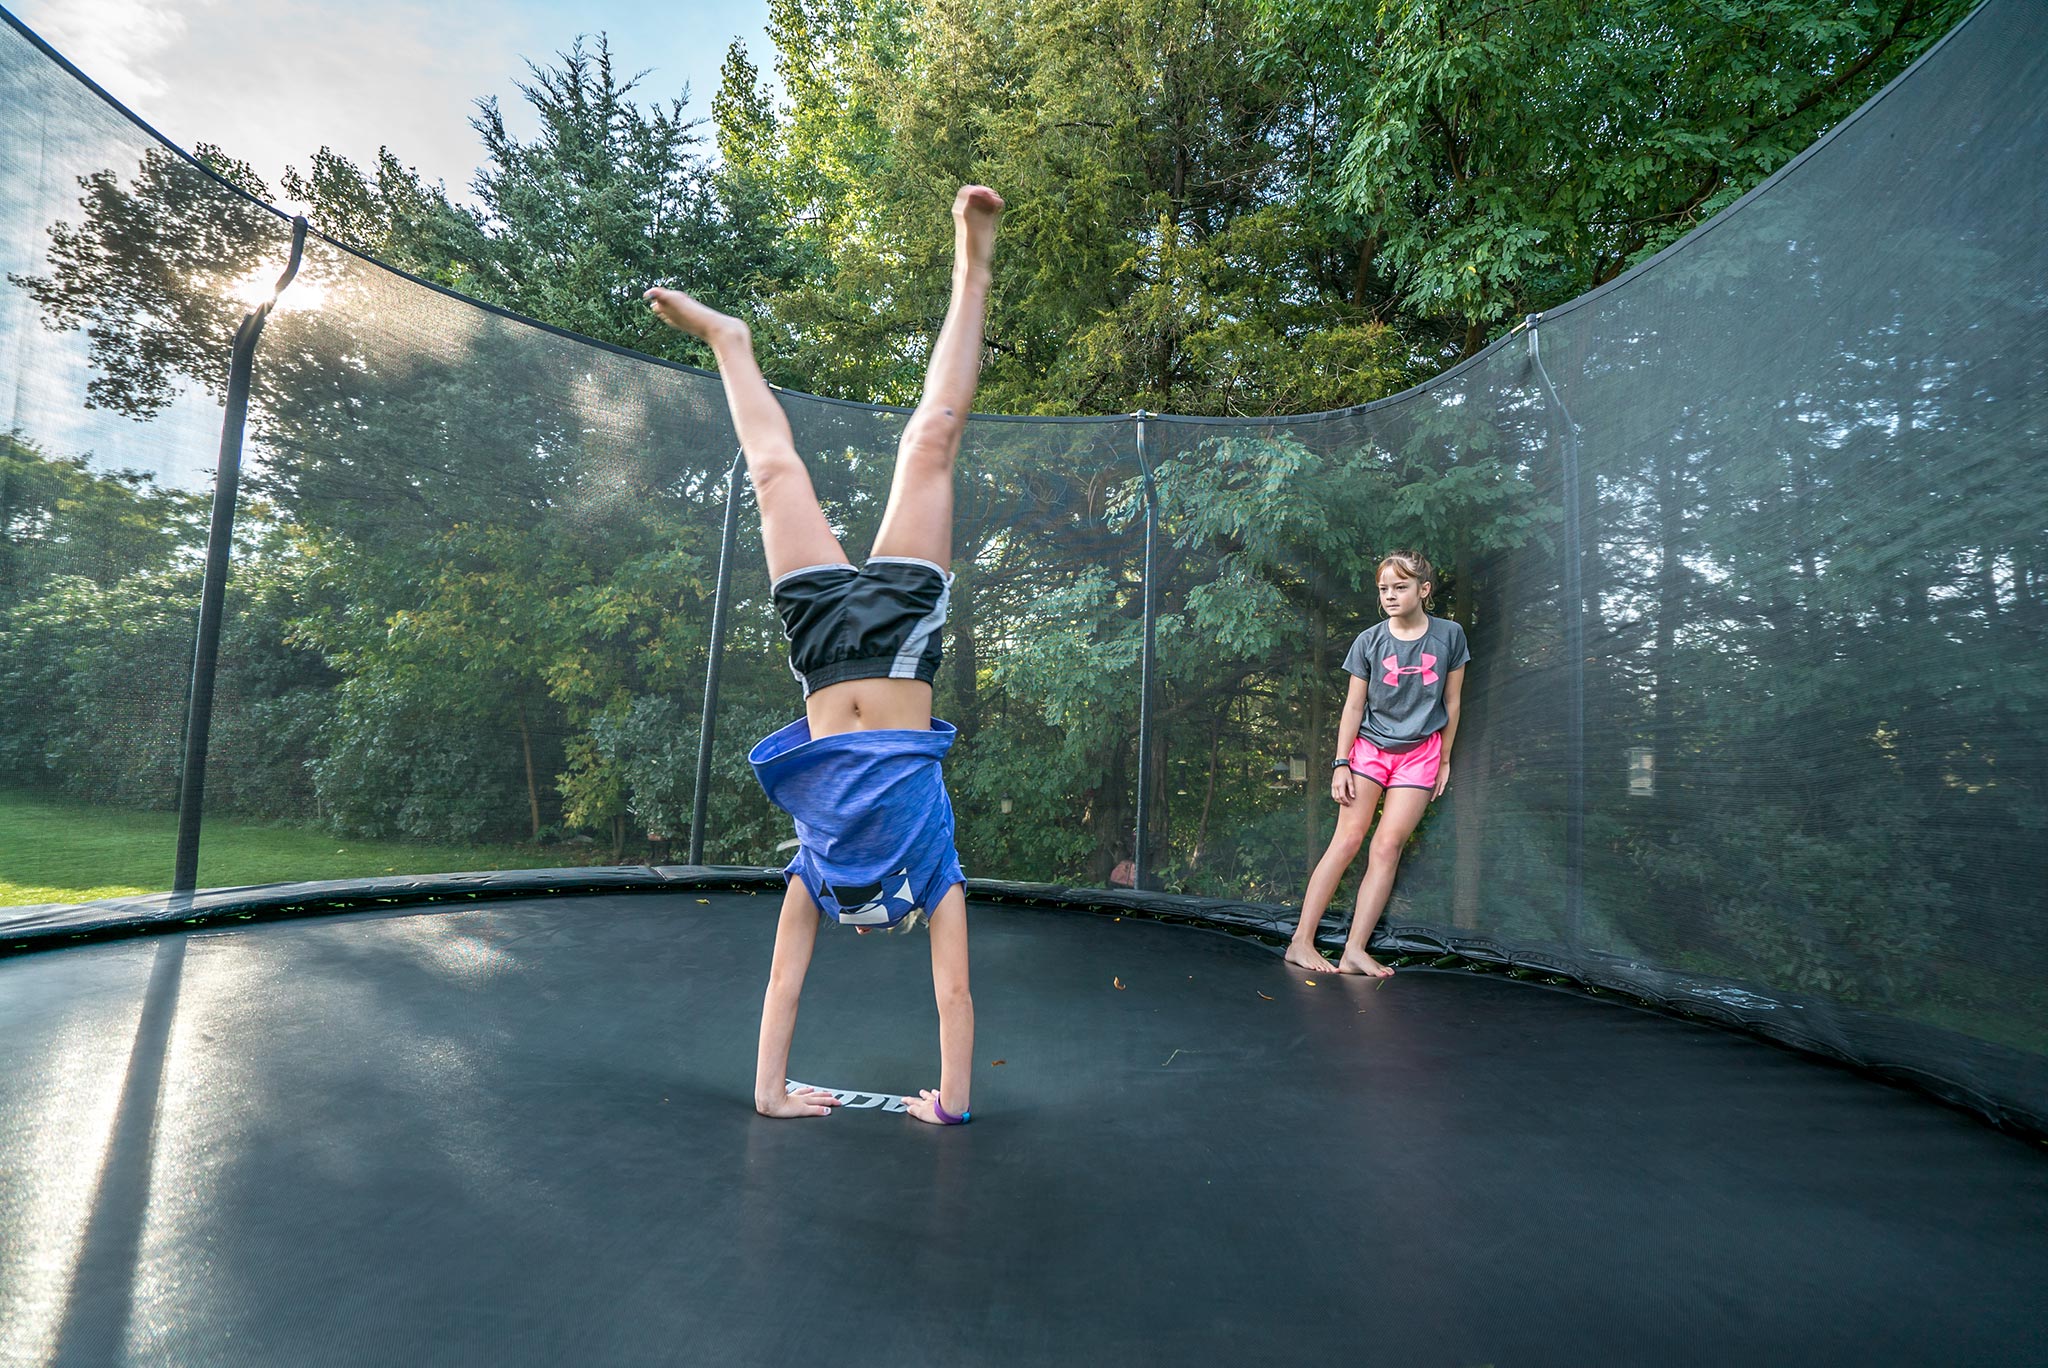 A girl handstanding a trampoline, fellow leaning to the safety net and watching